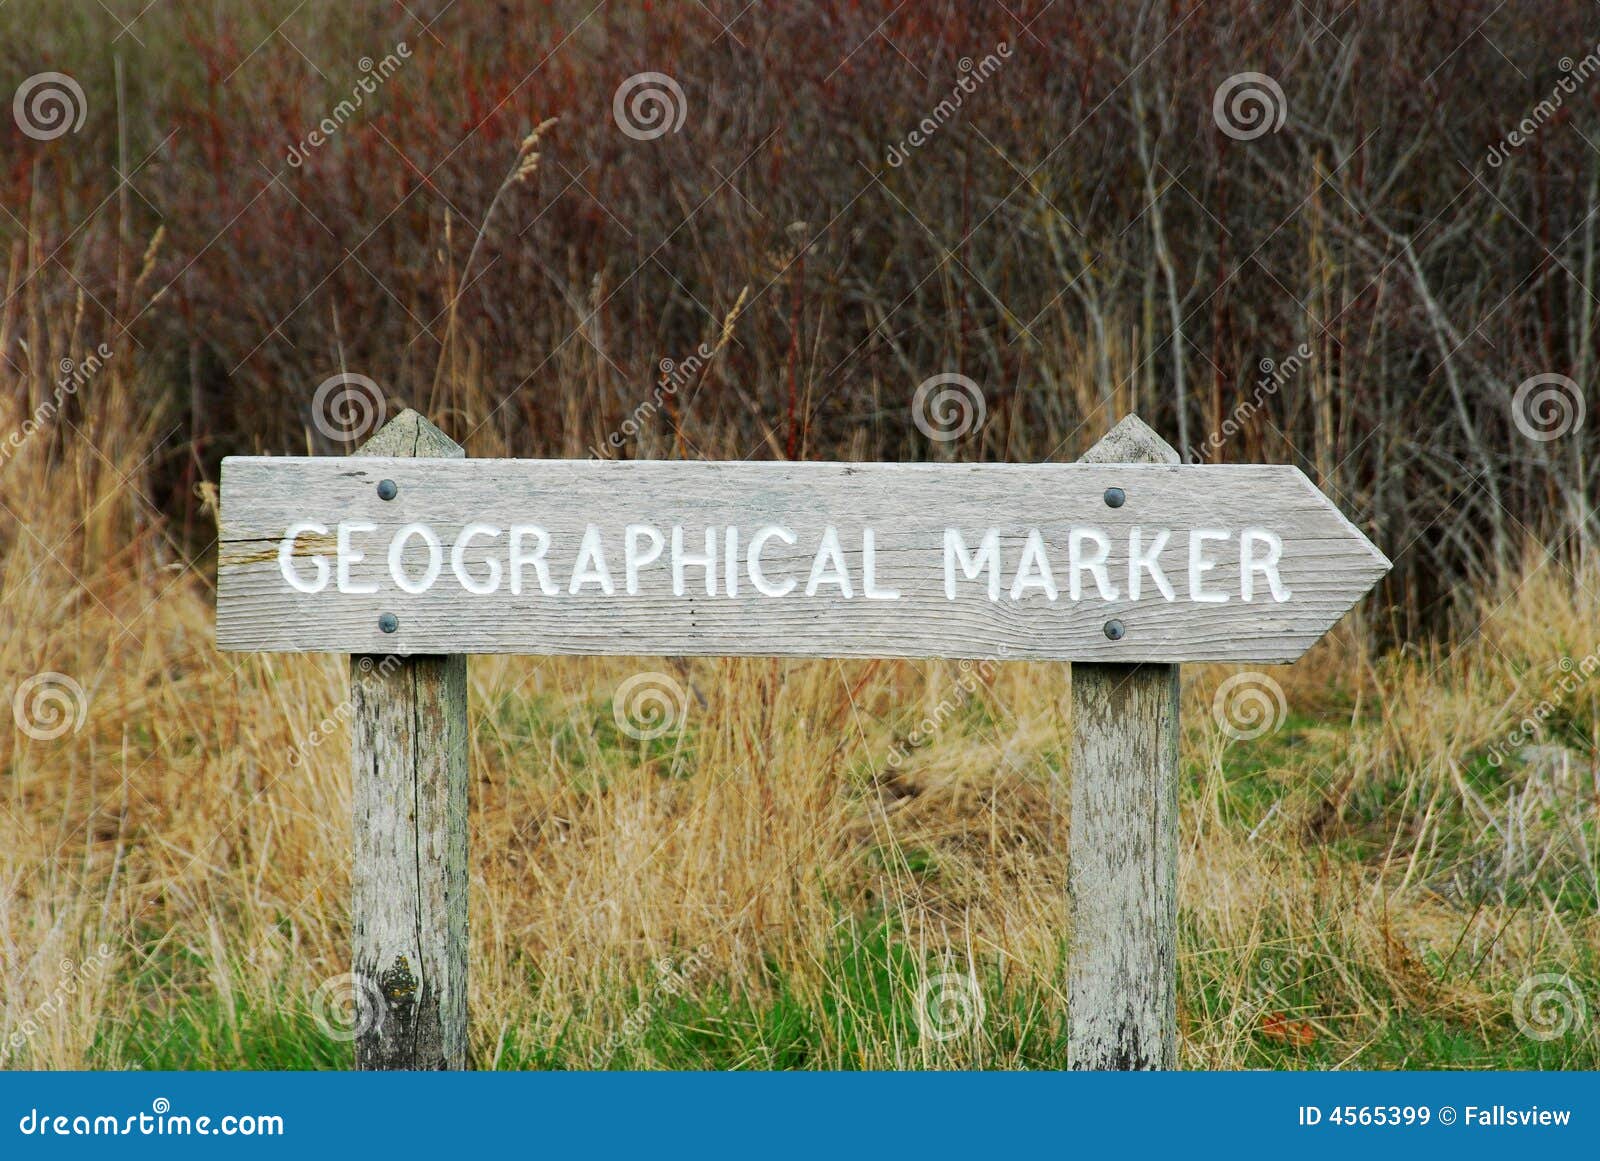 geographical marker